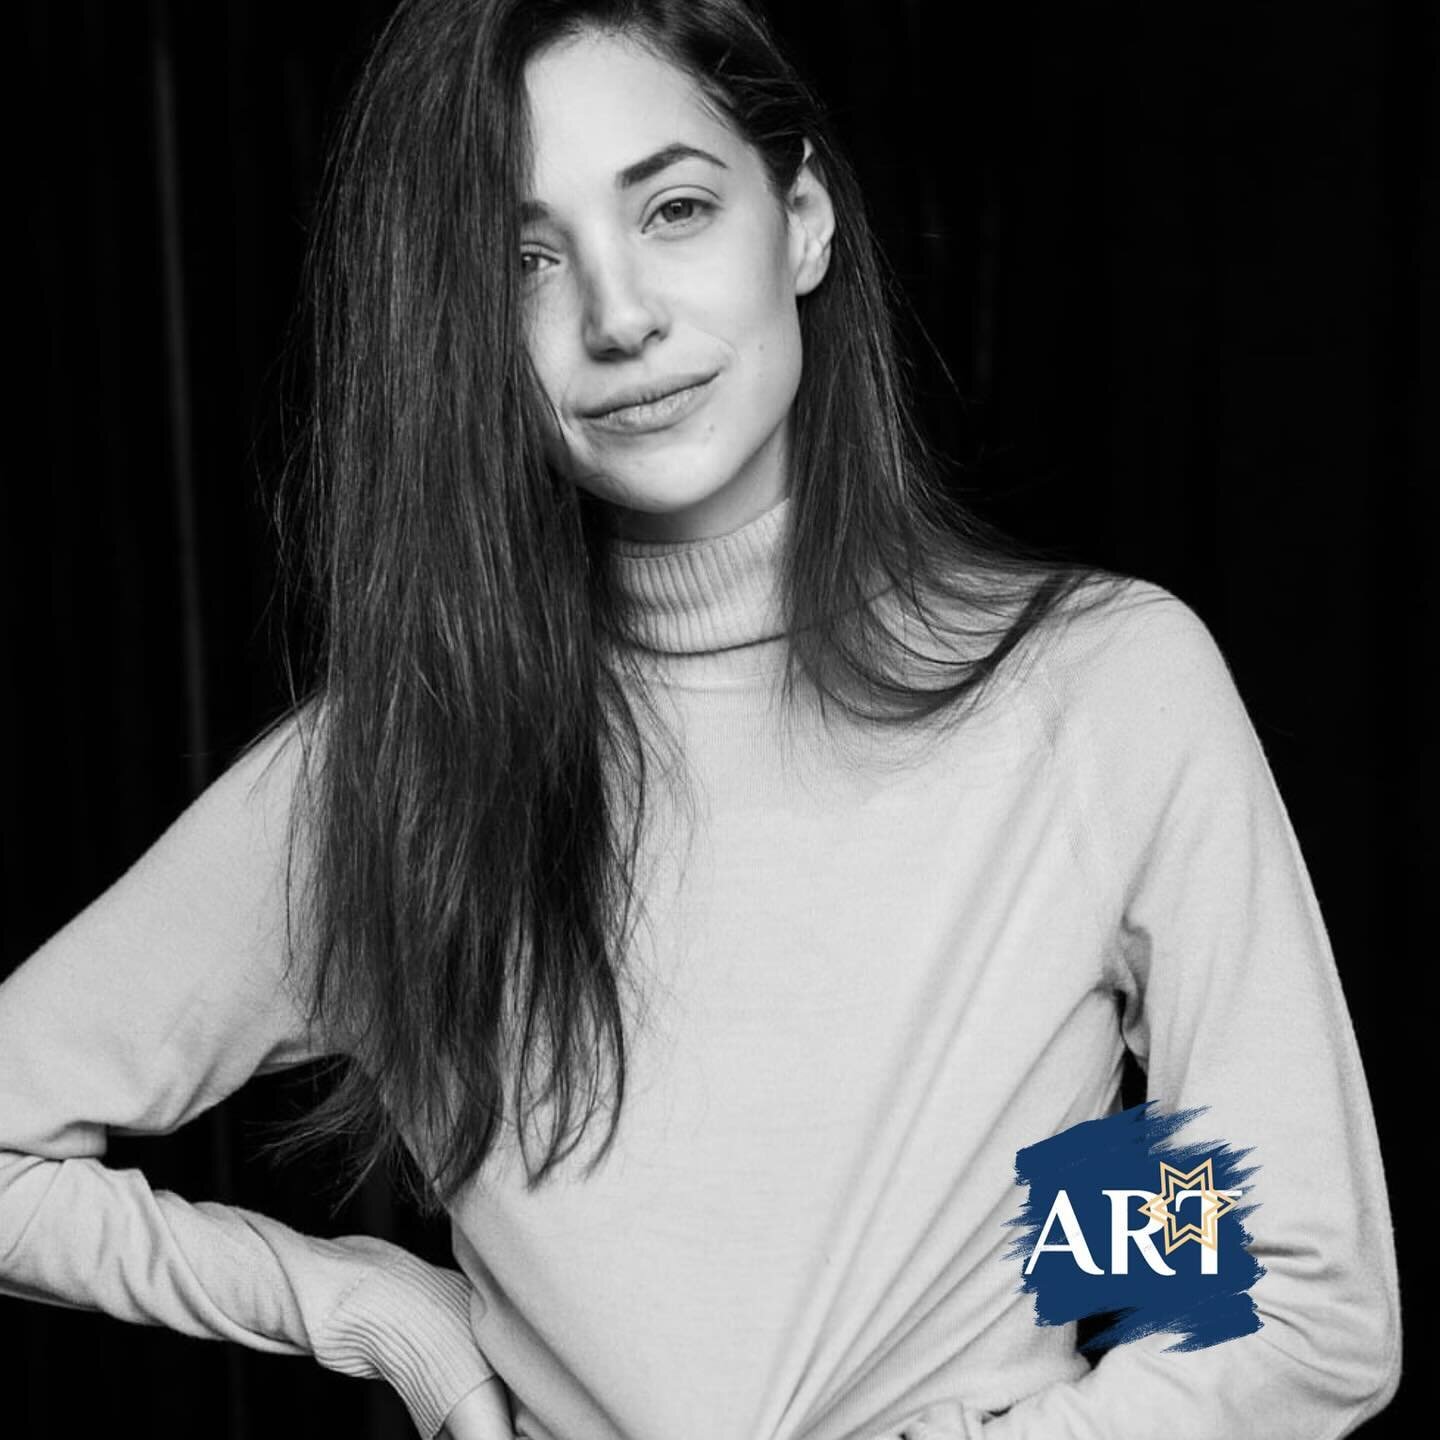 Art for a Cause Spotlight: Meet Our Generous Artist, Lee Rubin @_lee_rubin_ 

We are thrilled to introduce you to the talented artist, Lee Rubin, who has graciously contributed her heart and art to support our cause.

Event: Art for a Cause
Date: Dec